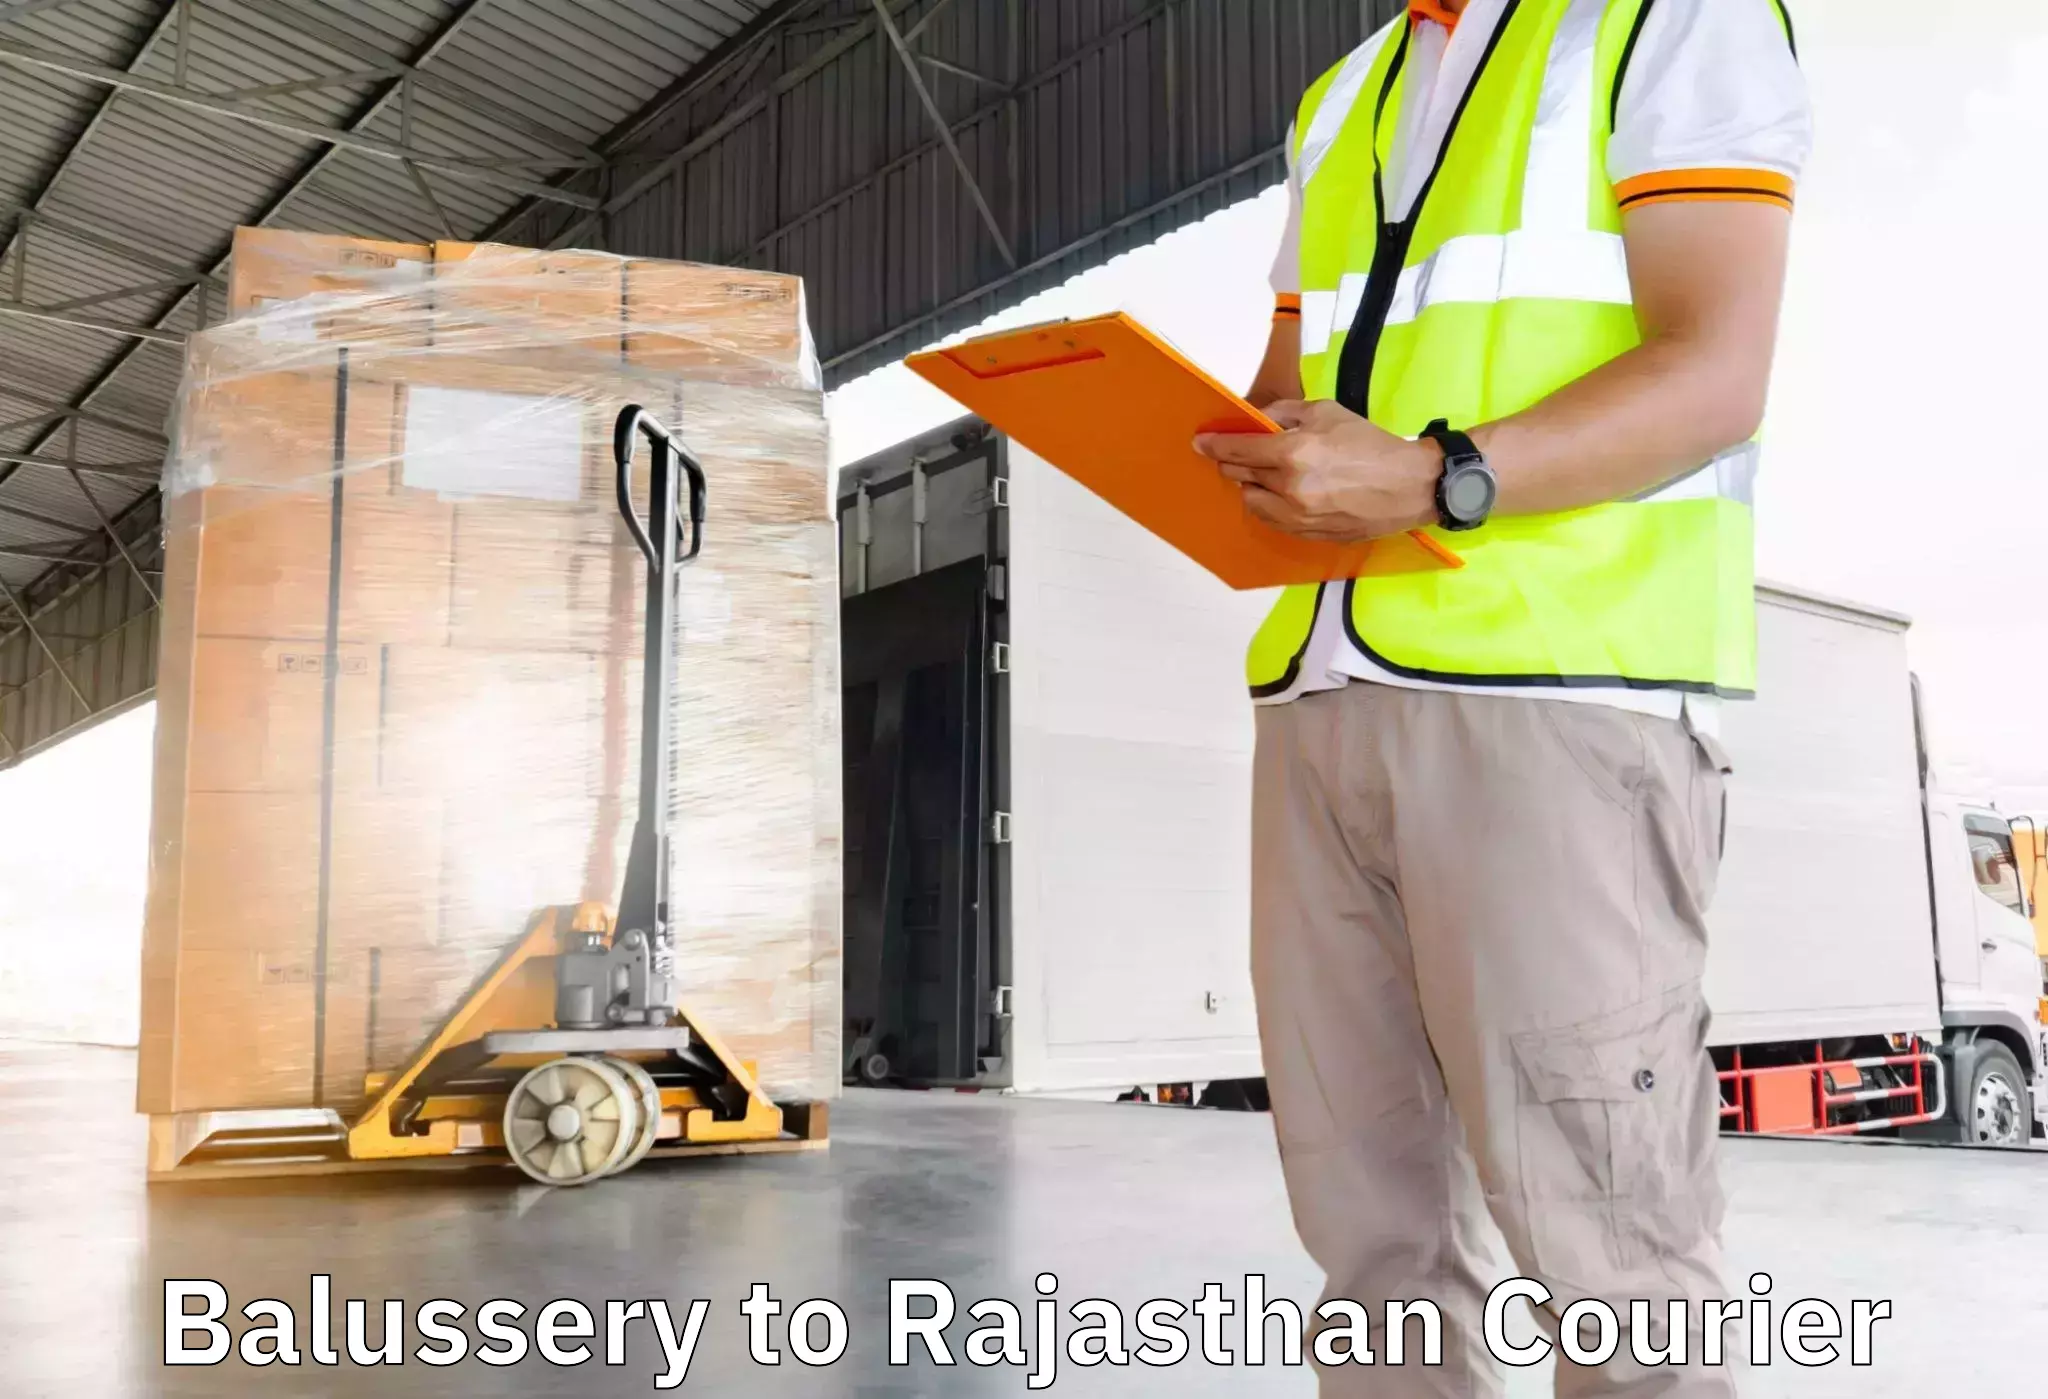 Furniture delivery service Balussery to Udaipur